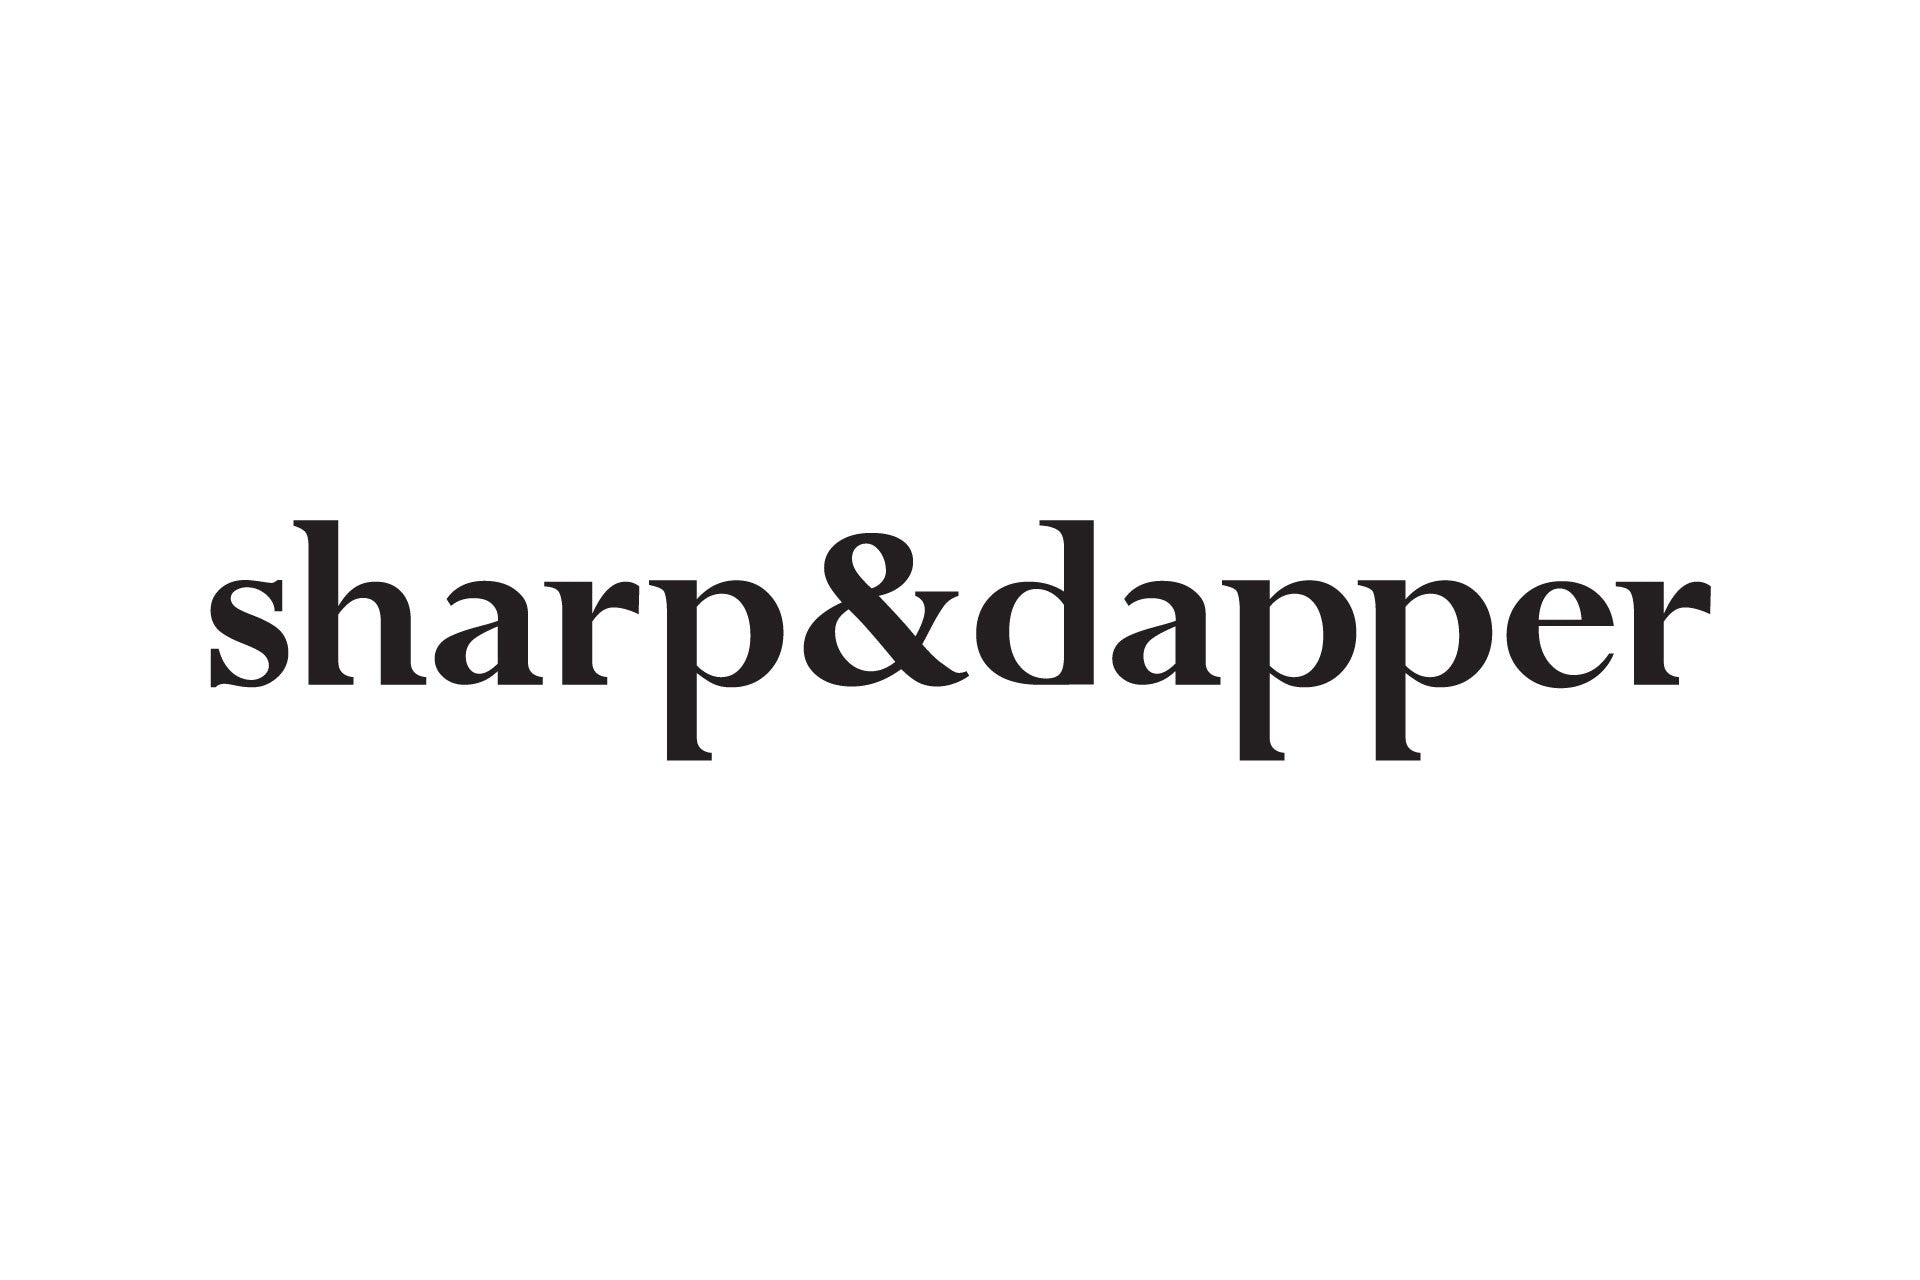 Welcome to the new sharp&dapper